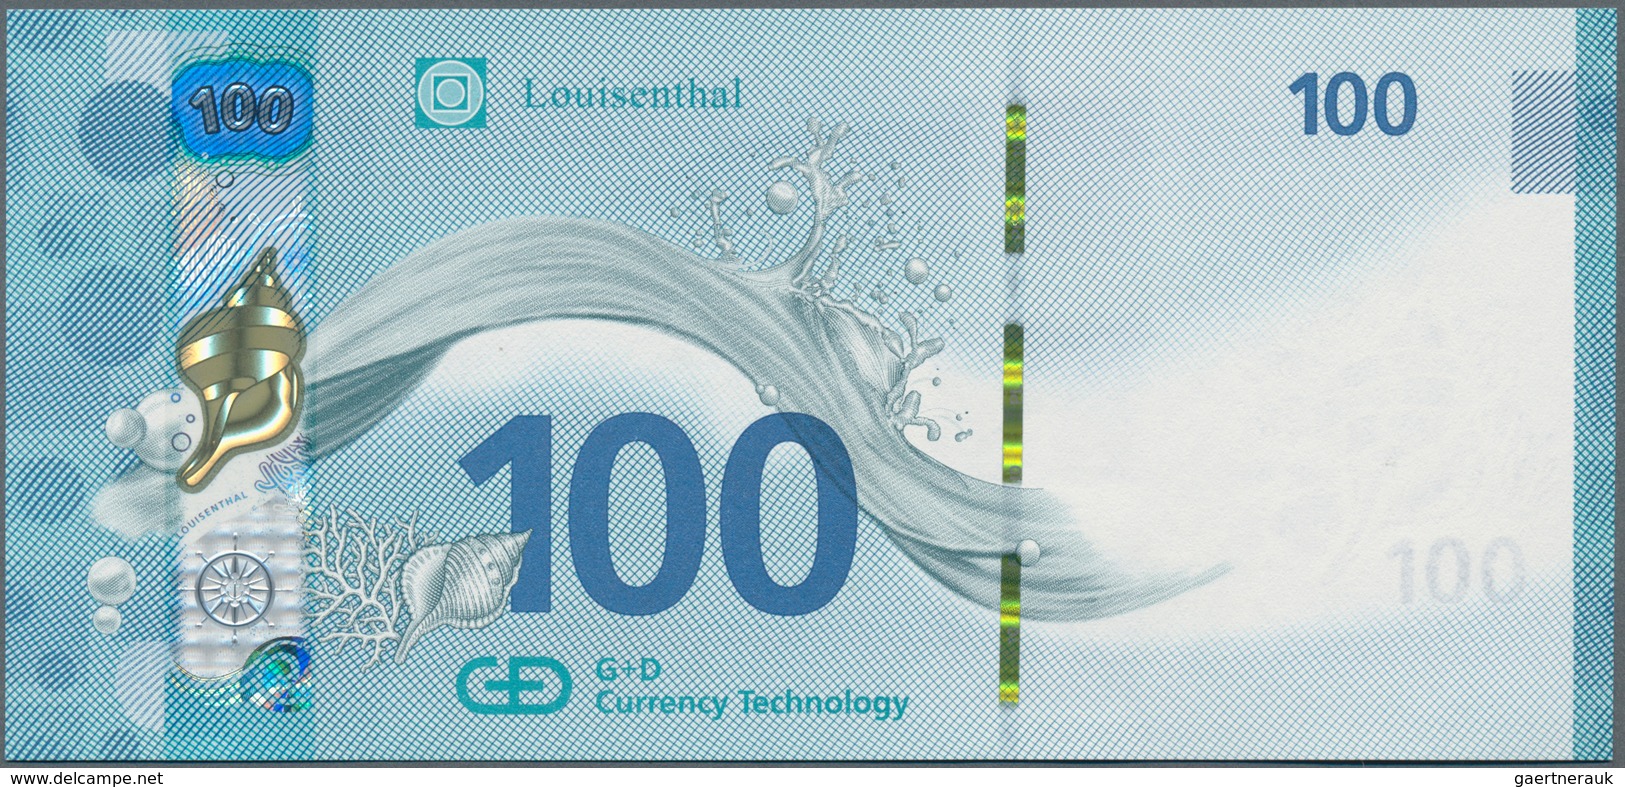 Testbanknoten: Test Note By Louisenthal “100 Water Note” 2017 With The RollingStar LEAD Foil And Rol - Ficción & Especímenes